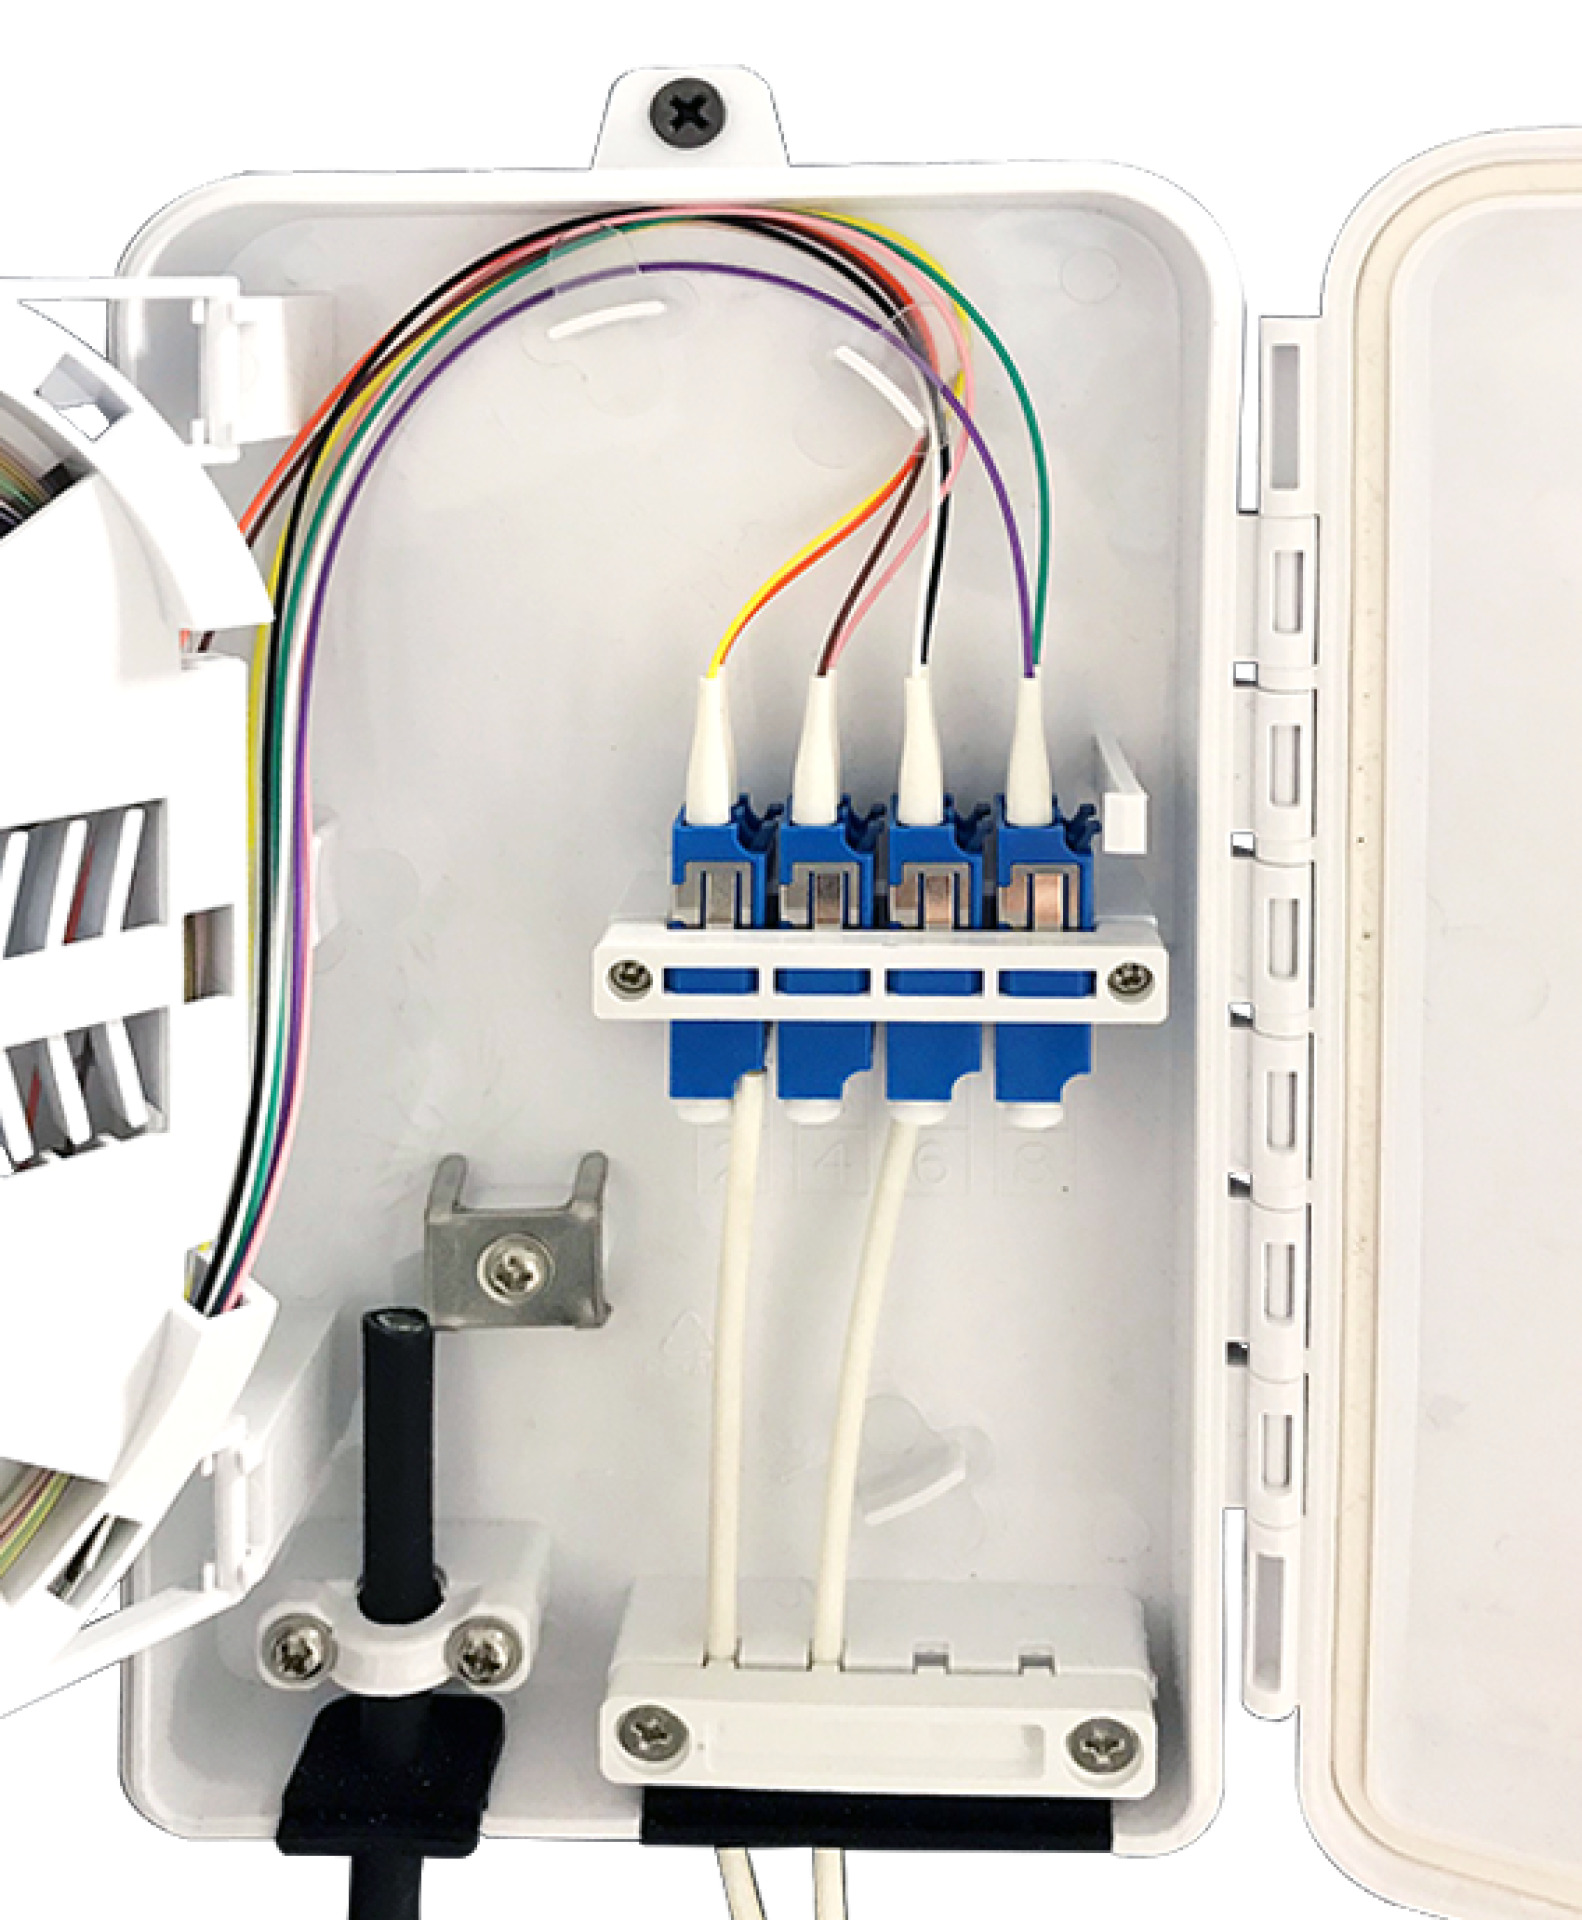 FTTH IP65 Connectionbox for 8fiber, 4adapter and Fiber overlength box